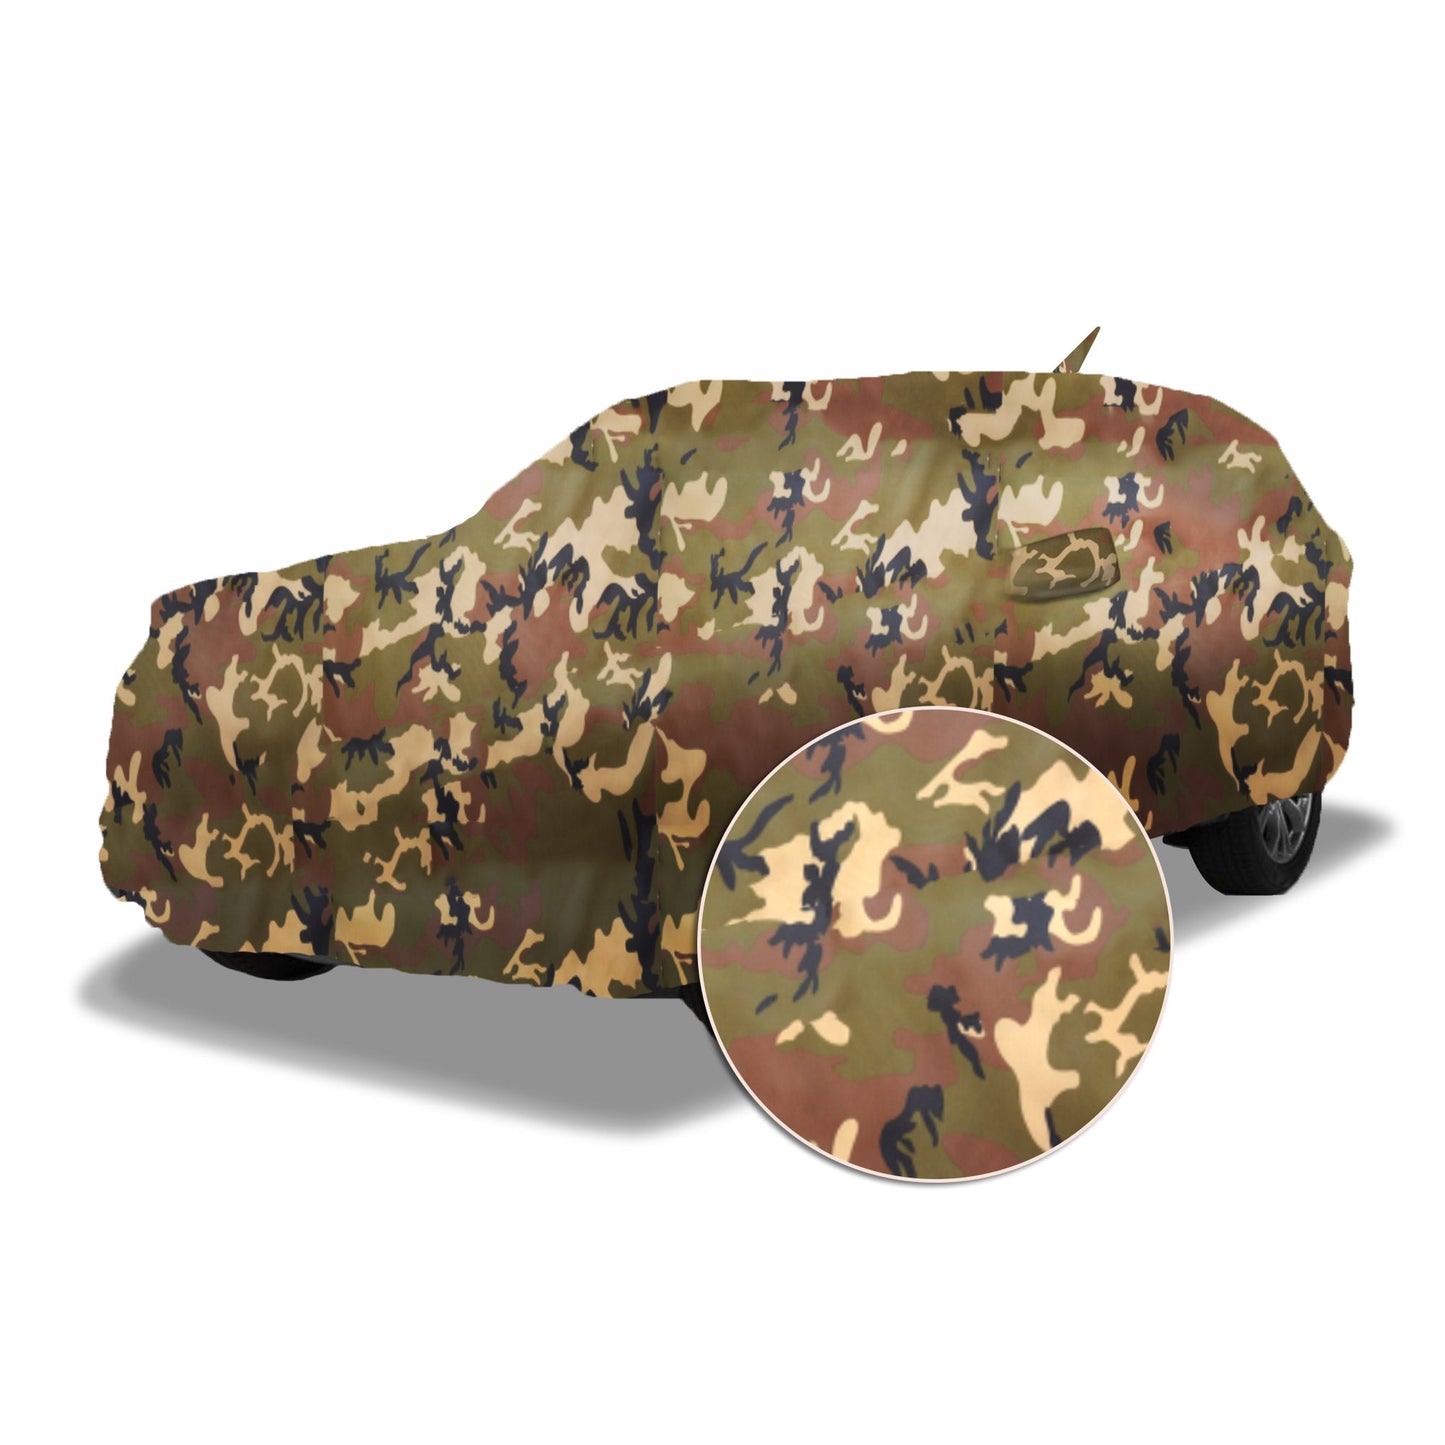 Ascot Maruti Suzuki Celerio 2014-2021 Model Car Body Cover Extra Strong & Dust Proof Jungle Military Car Cover with UV Proof & Water-Resistant Coating